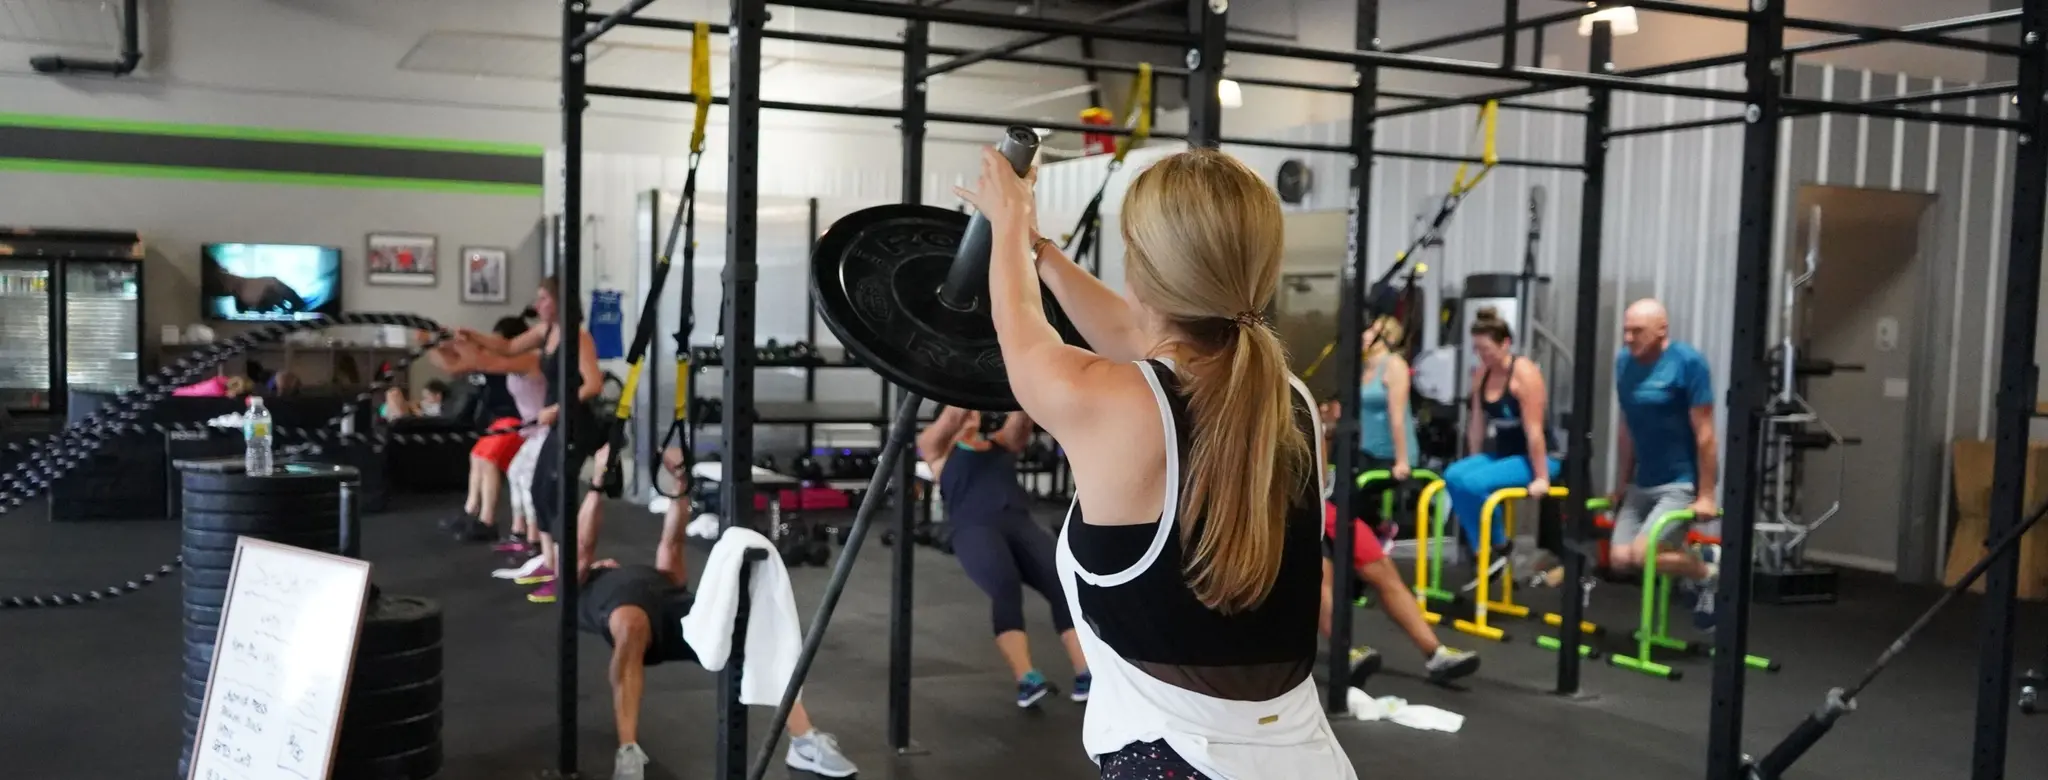 Woman exercising with heavy weights  in a high-intensity fitness studio